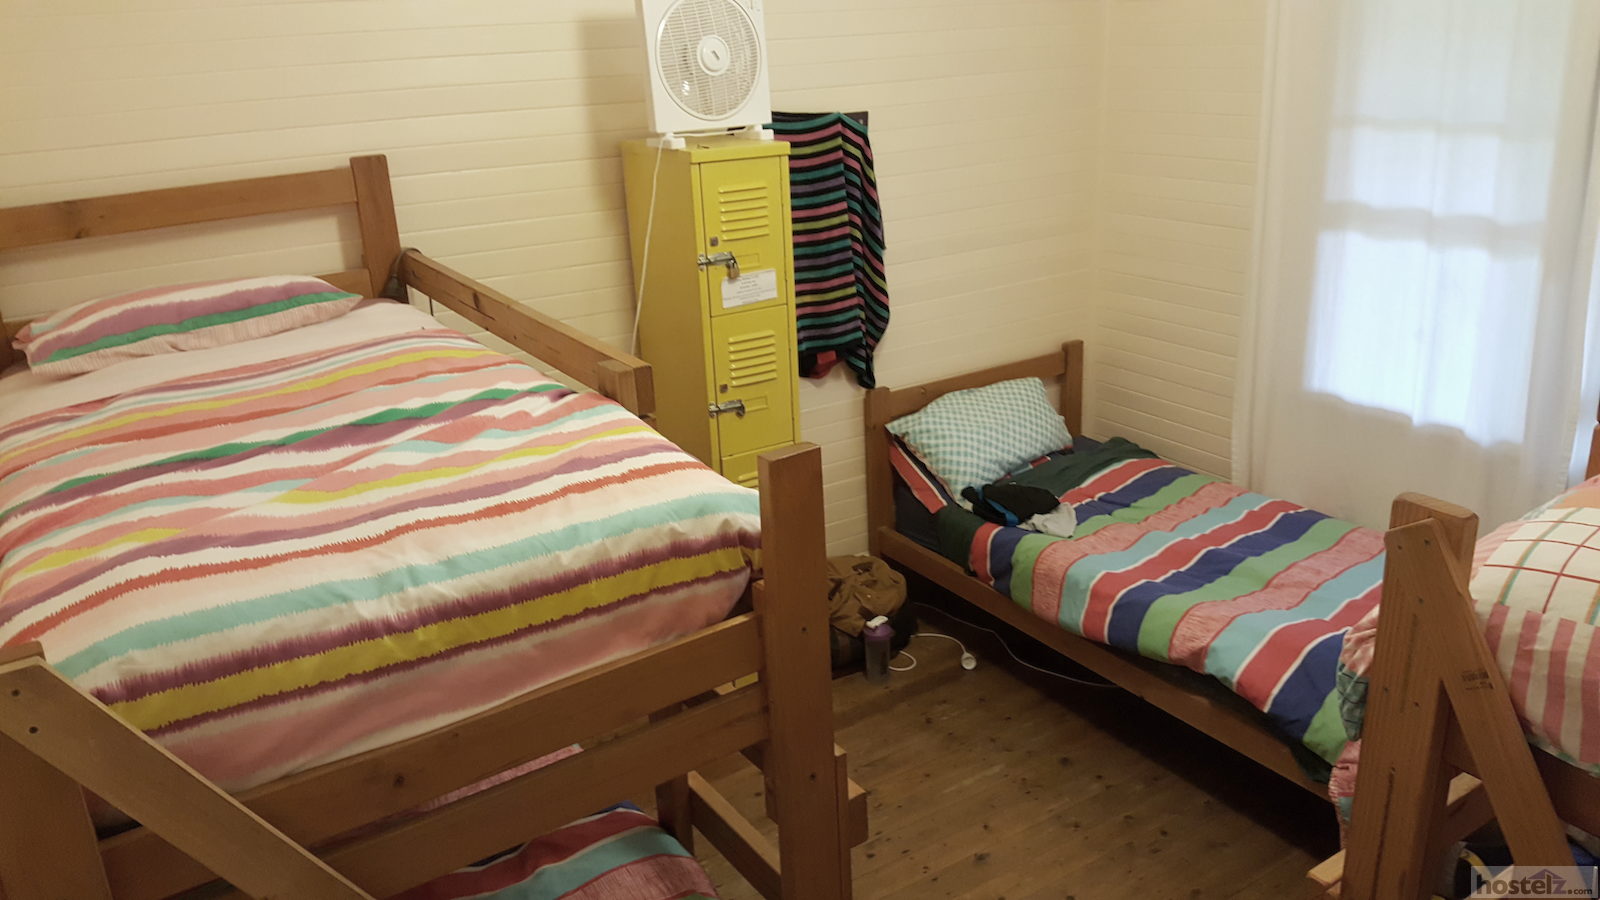 5-Bed Dormitory